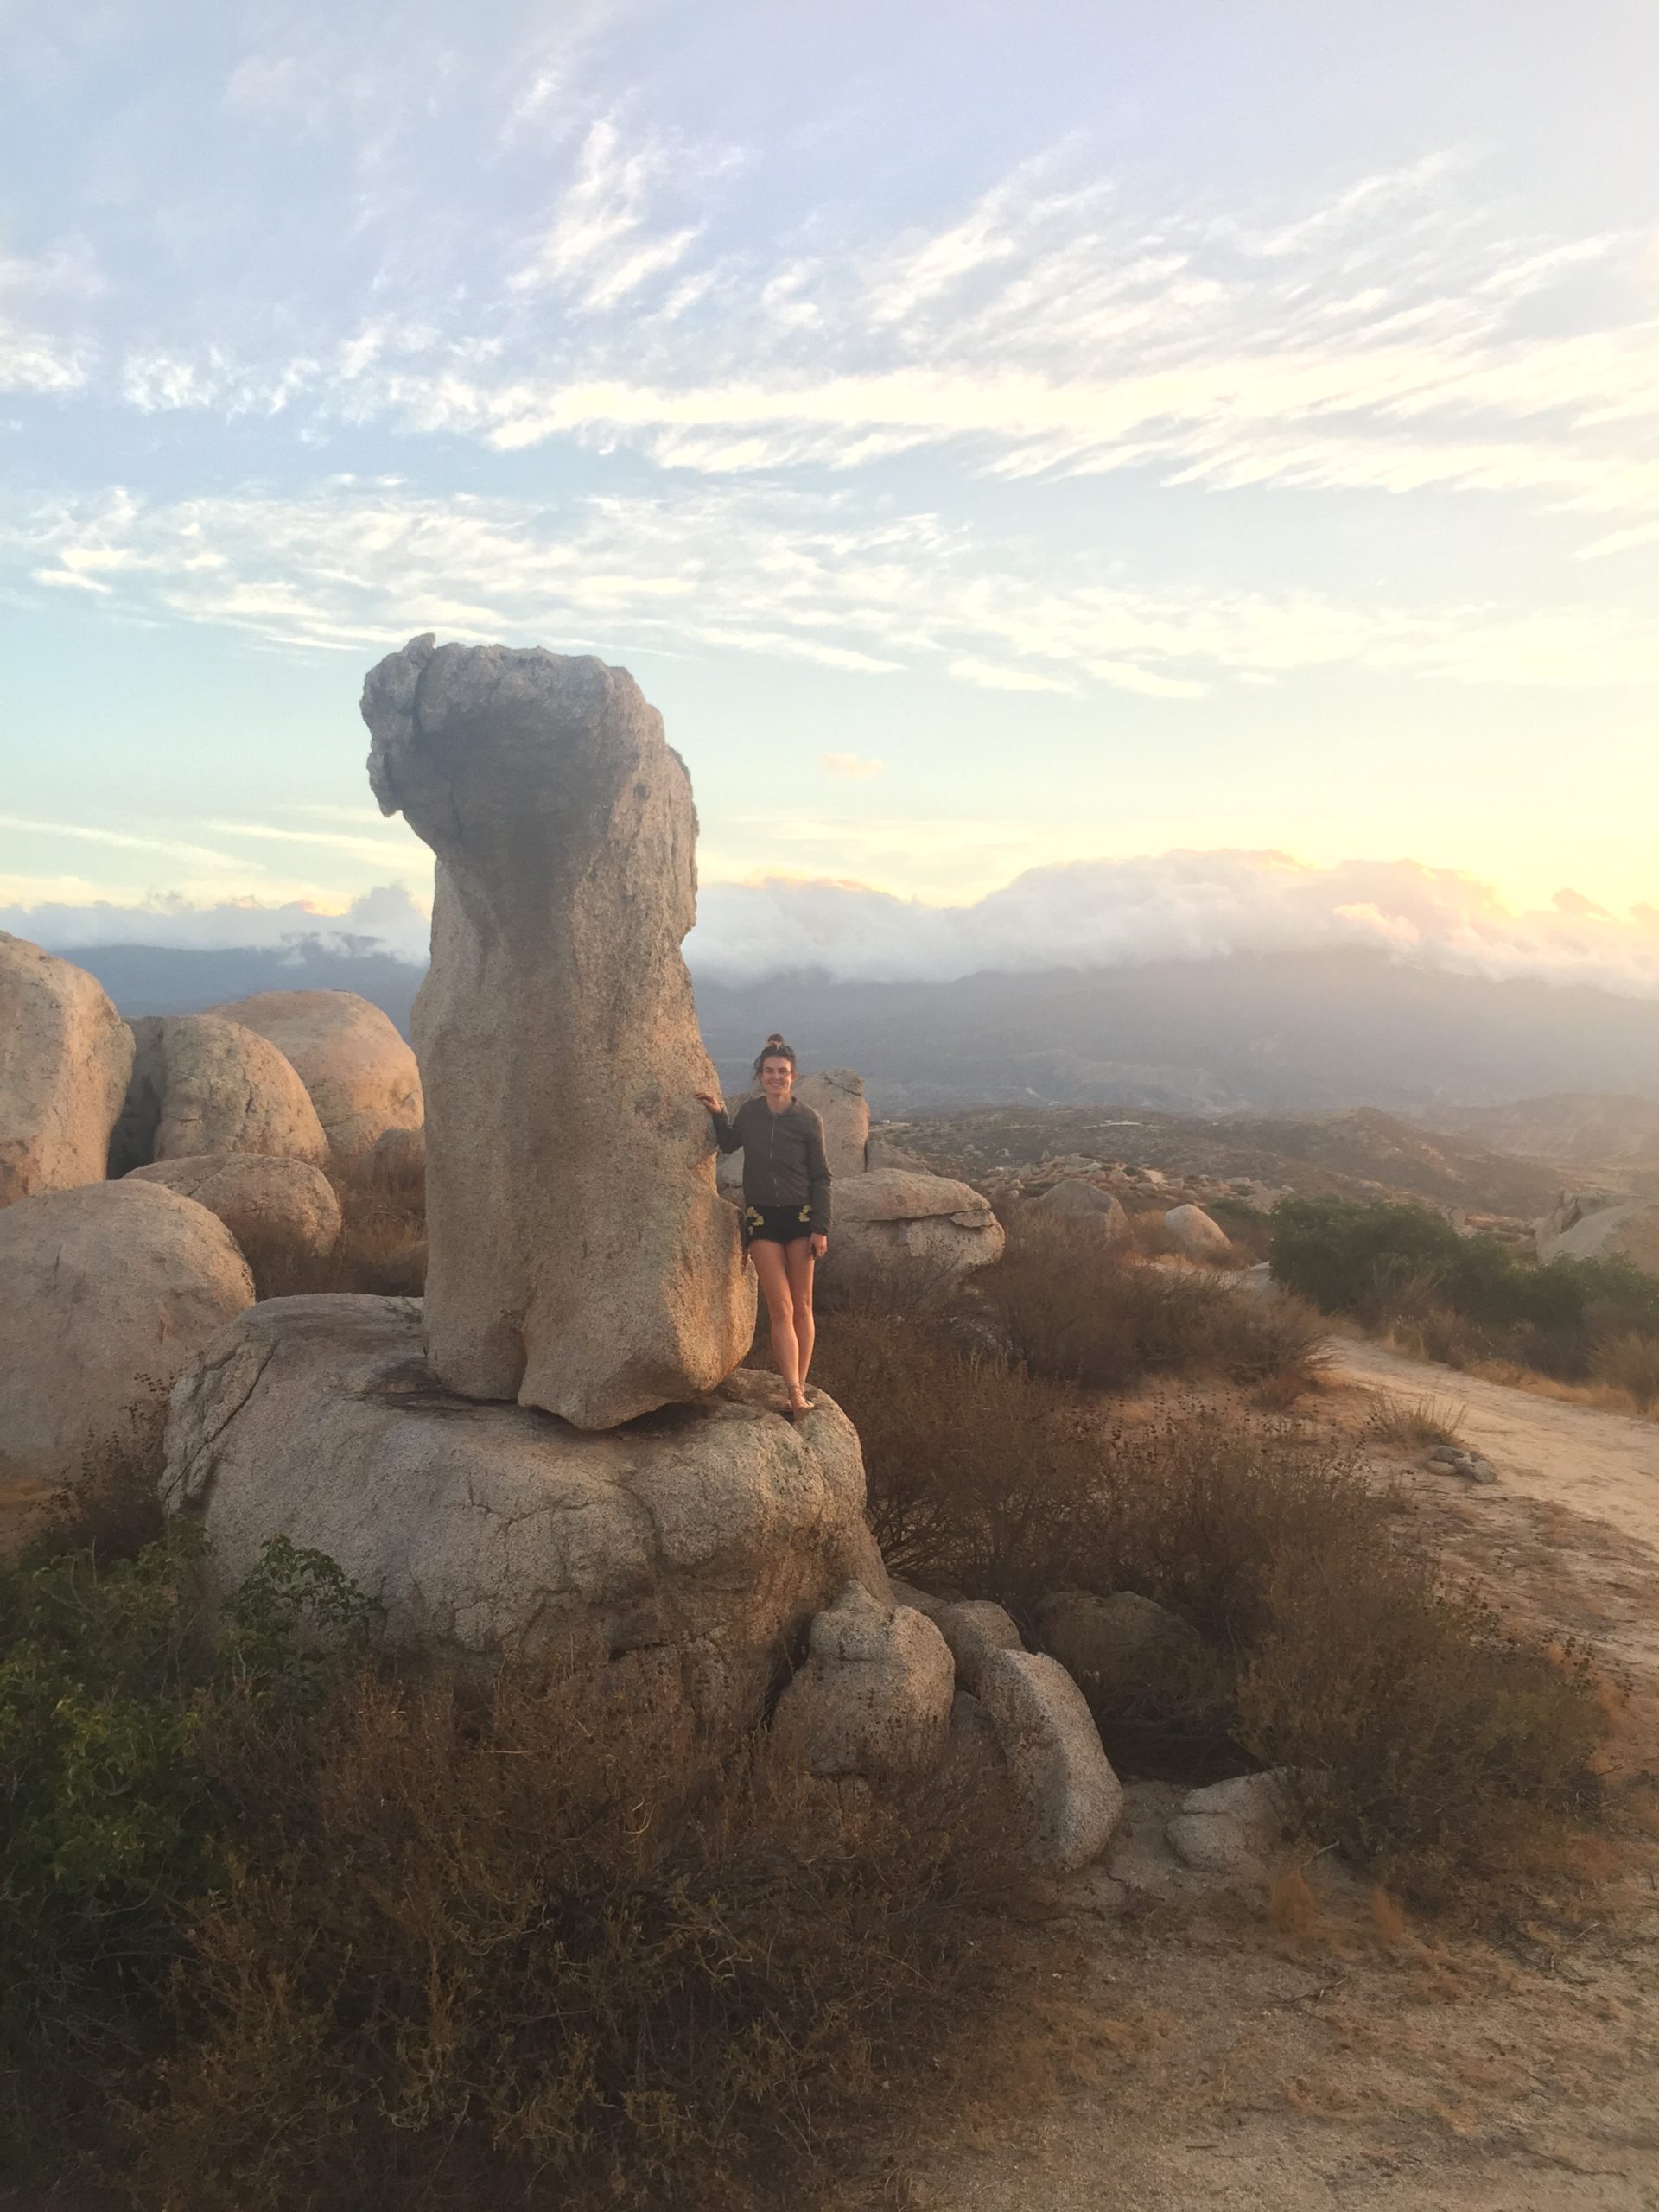 Anna Rood standing next to a tall, slender precariously balanced rock in Southern California. Cosmogenic surface exposure dating samples have been collected to determine its age, and a 3D model has been made to determine its probability of toppling due to earthquake ground shaking. Credit: Anna Rood & Dylan Rood, Imperial College London